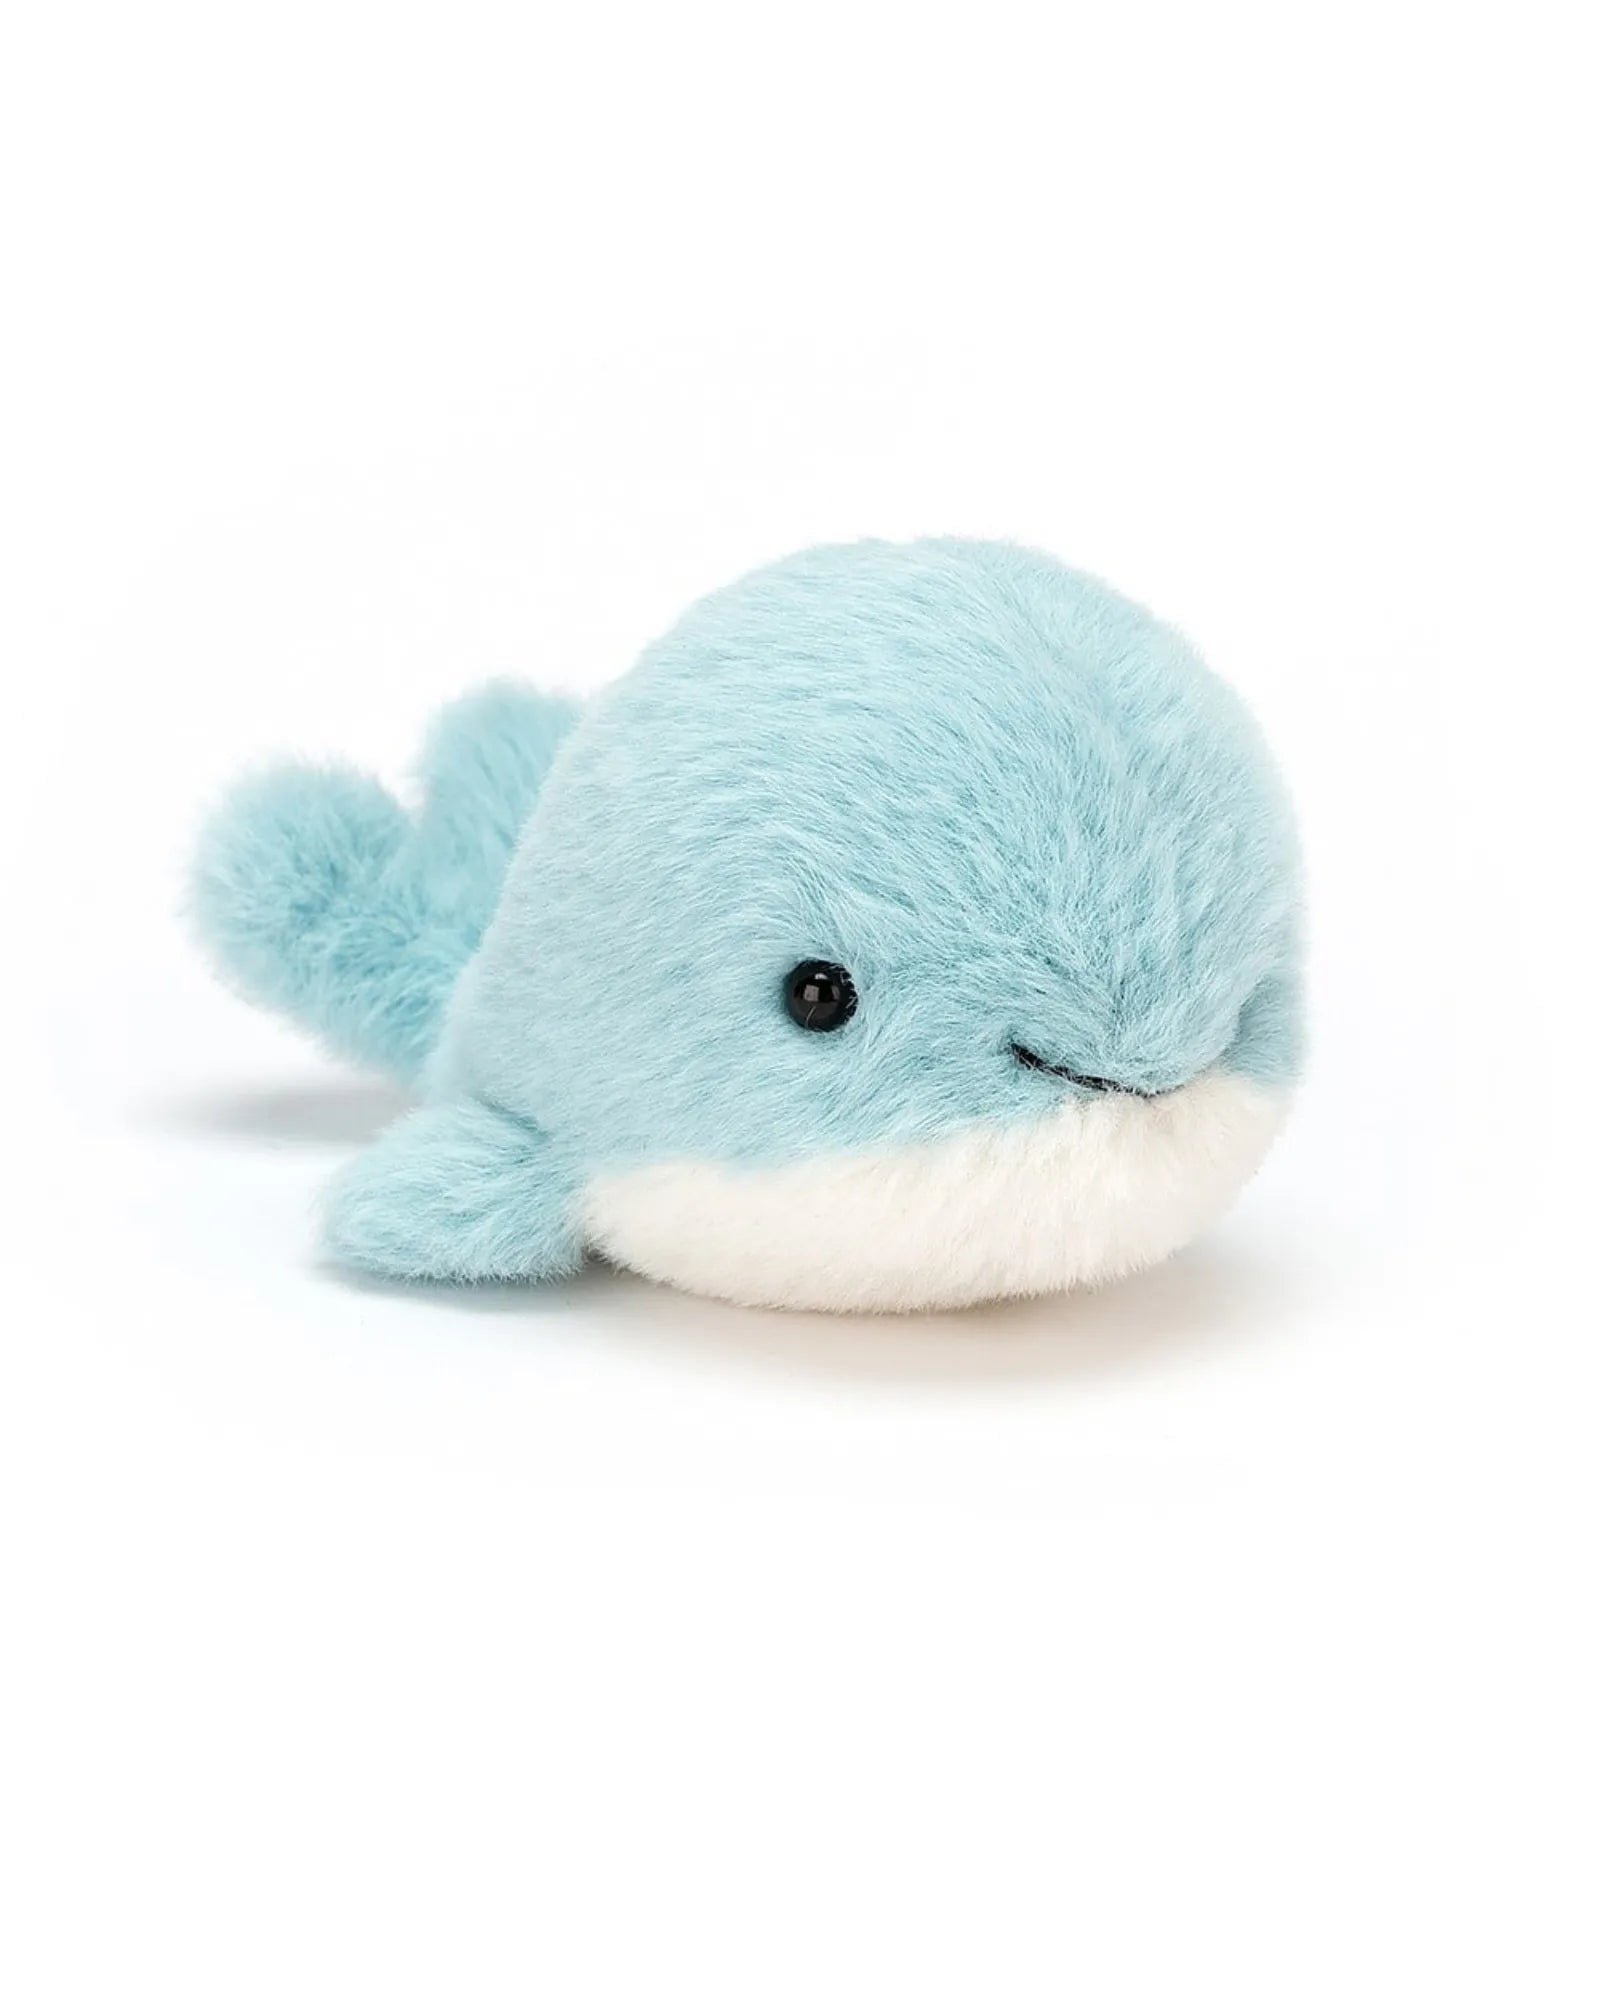 Fluffy Whale